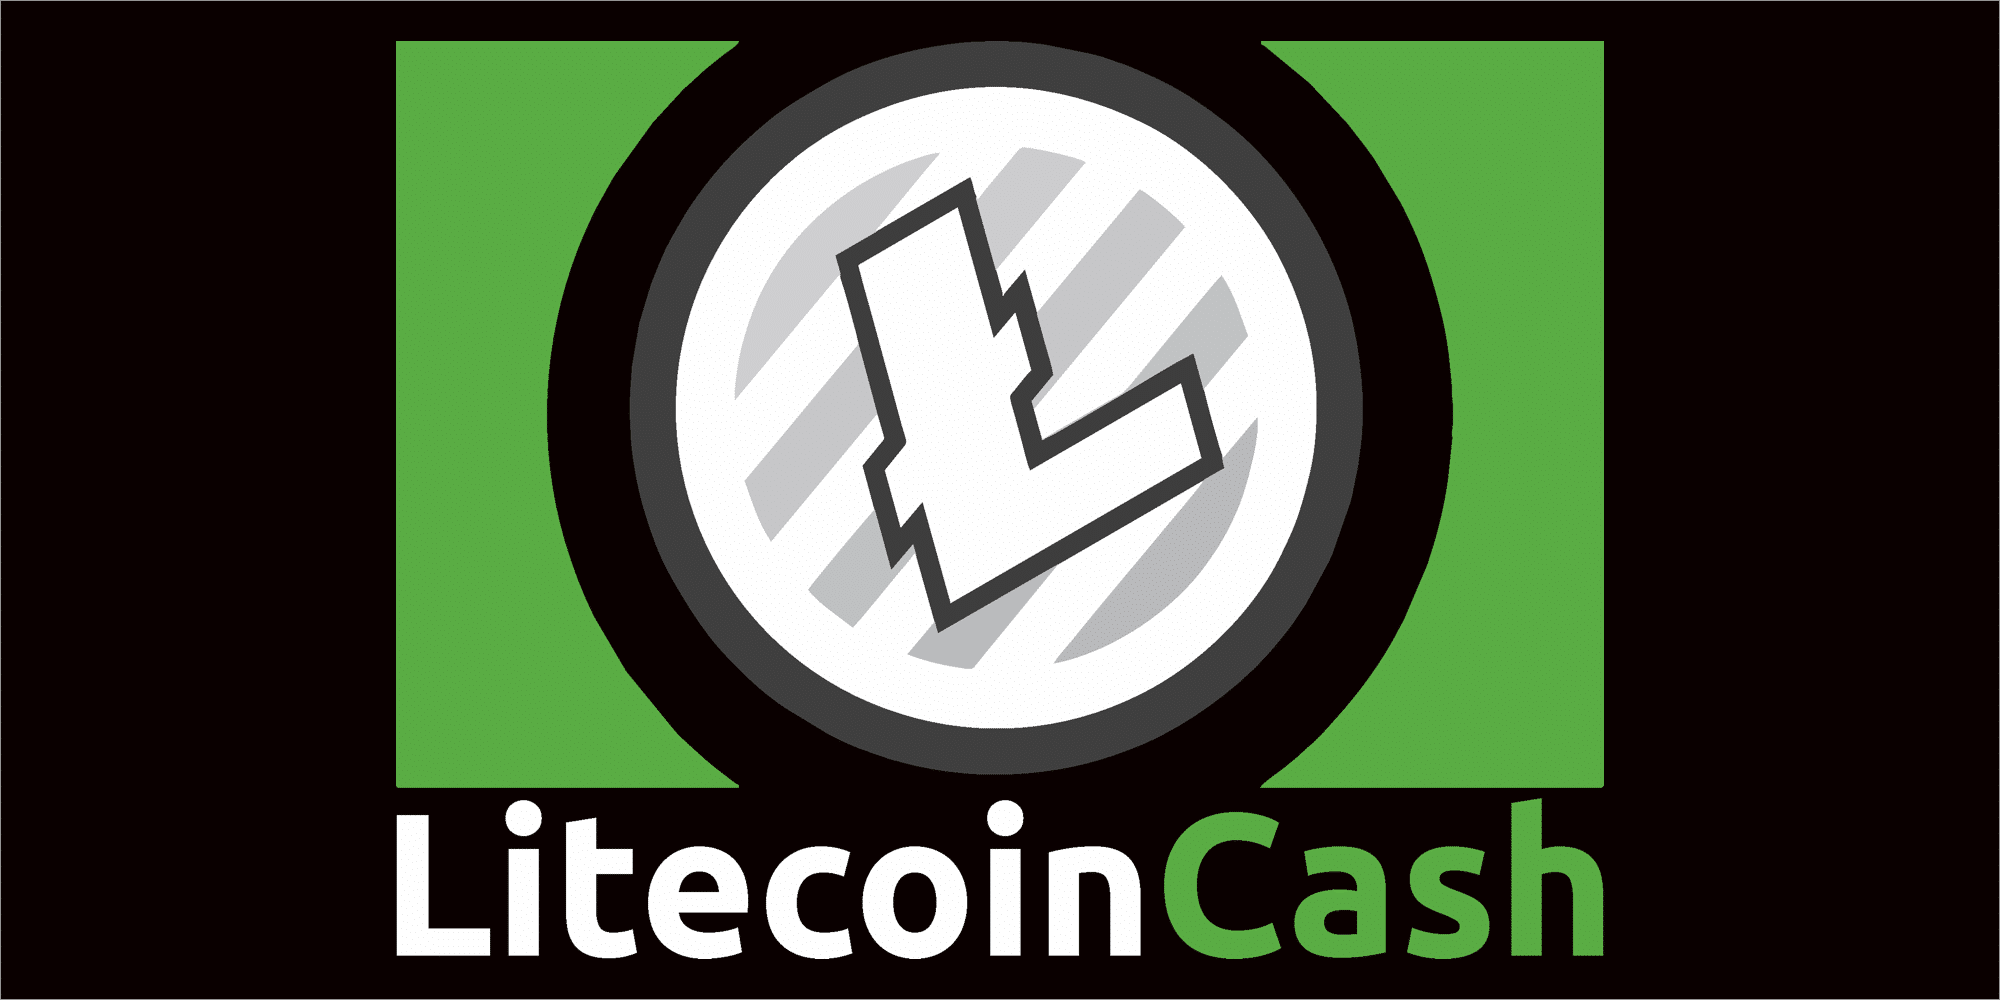 Litecoin cash whitepaper which to buy bitcoin or ethereum